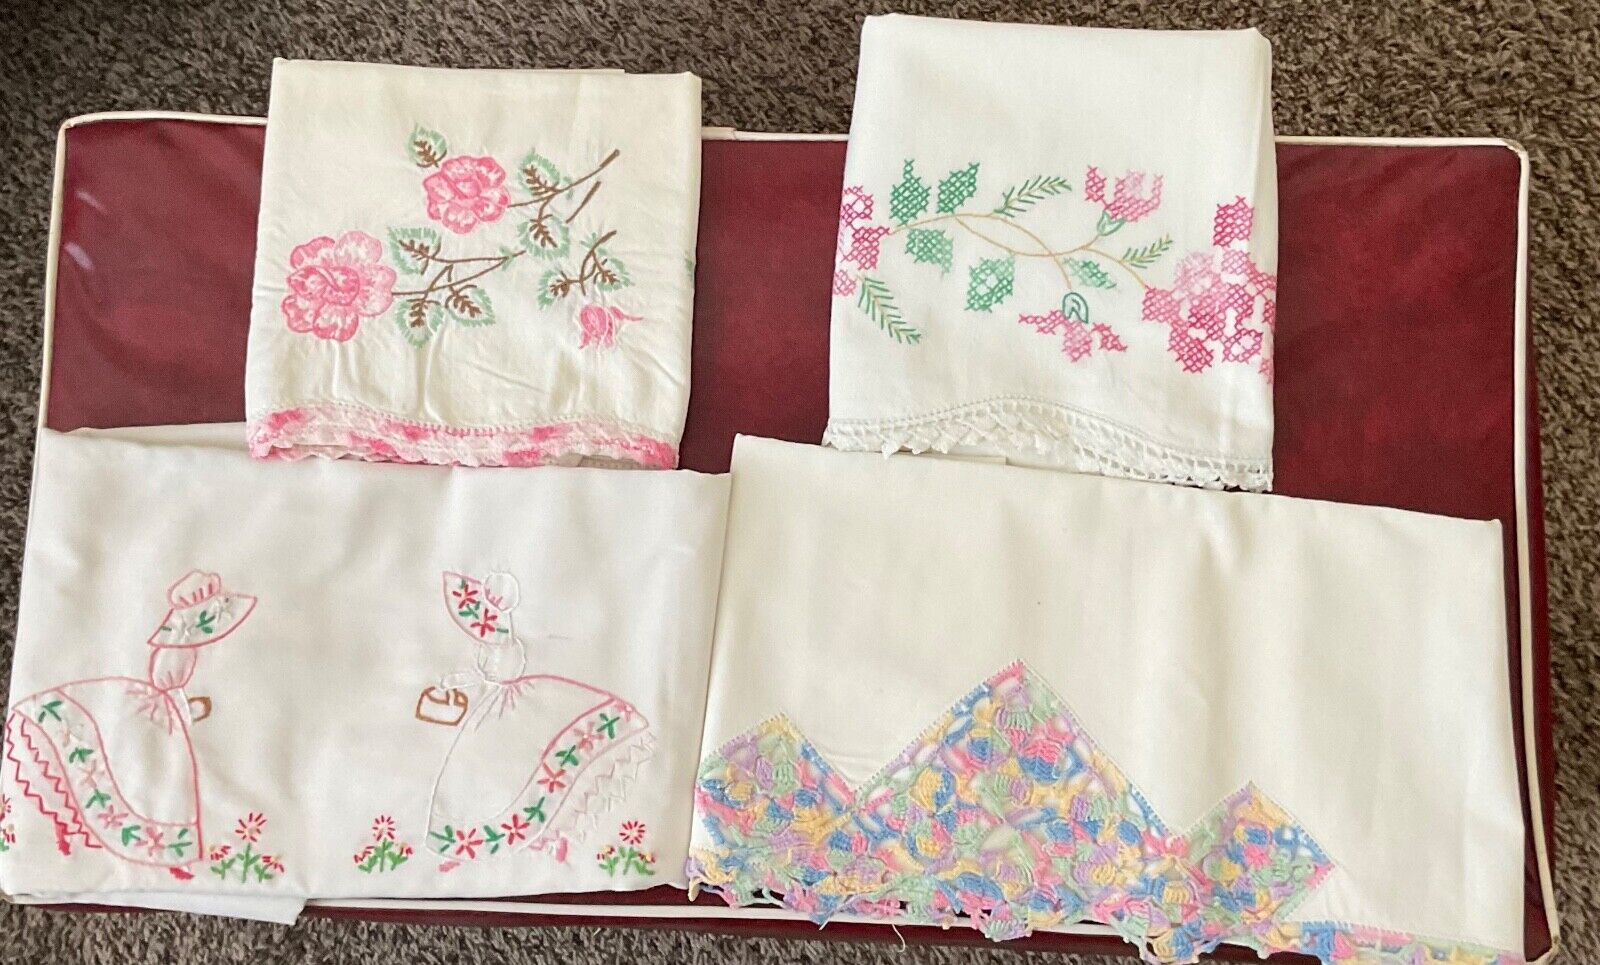 4* Single Standard Pillow Cases all with Handcrafted Details* So Belle* Pink-Blu